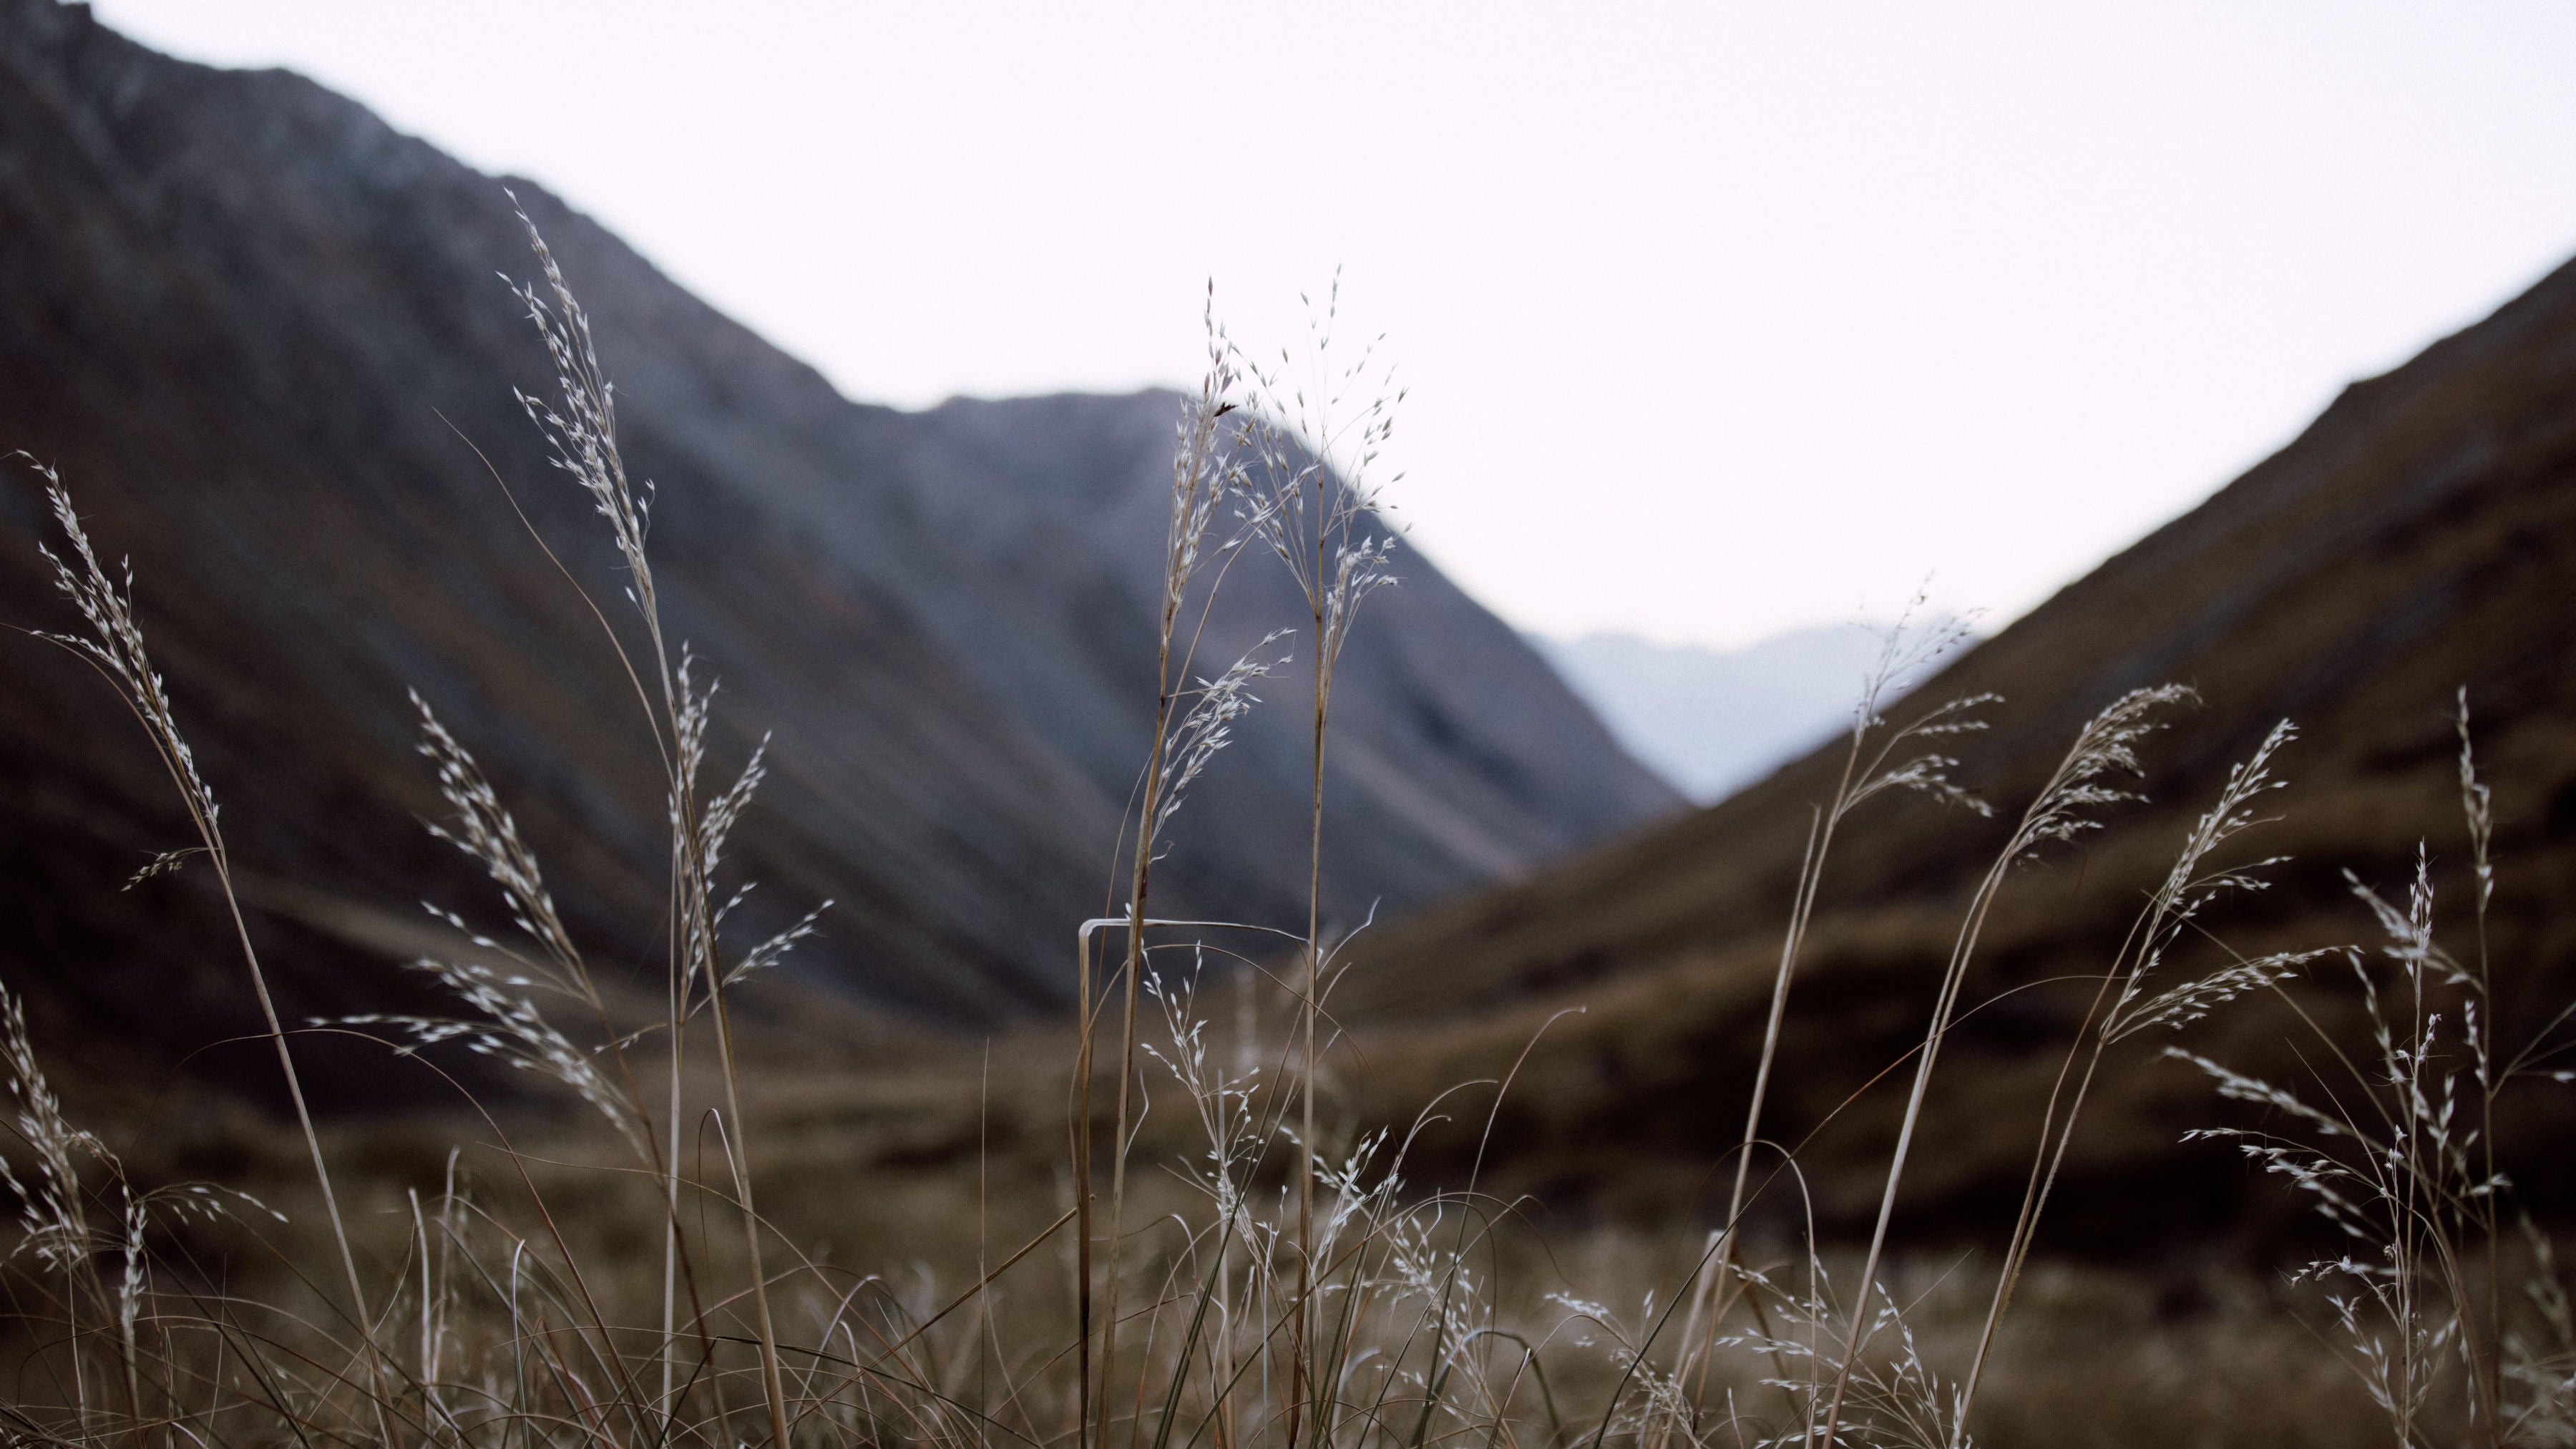 Long wild grass in the foreground overlooking the Mount Nicholas Station mountains.